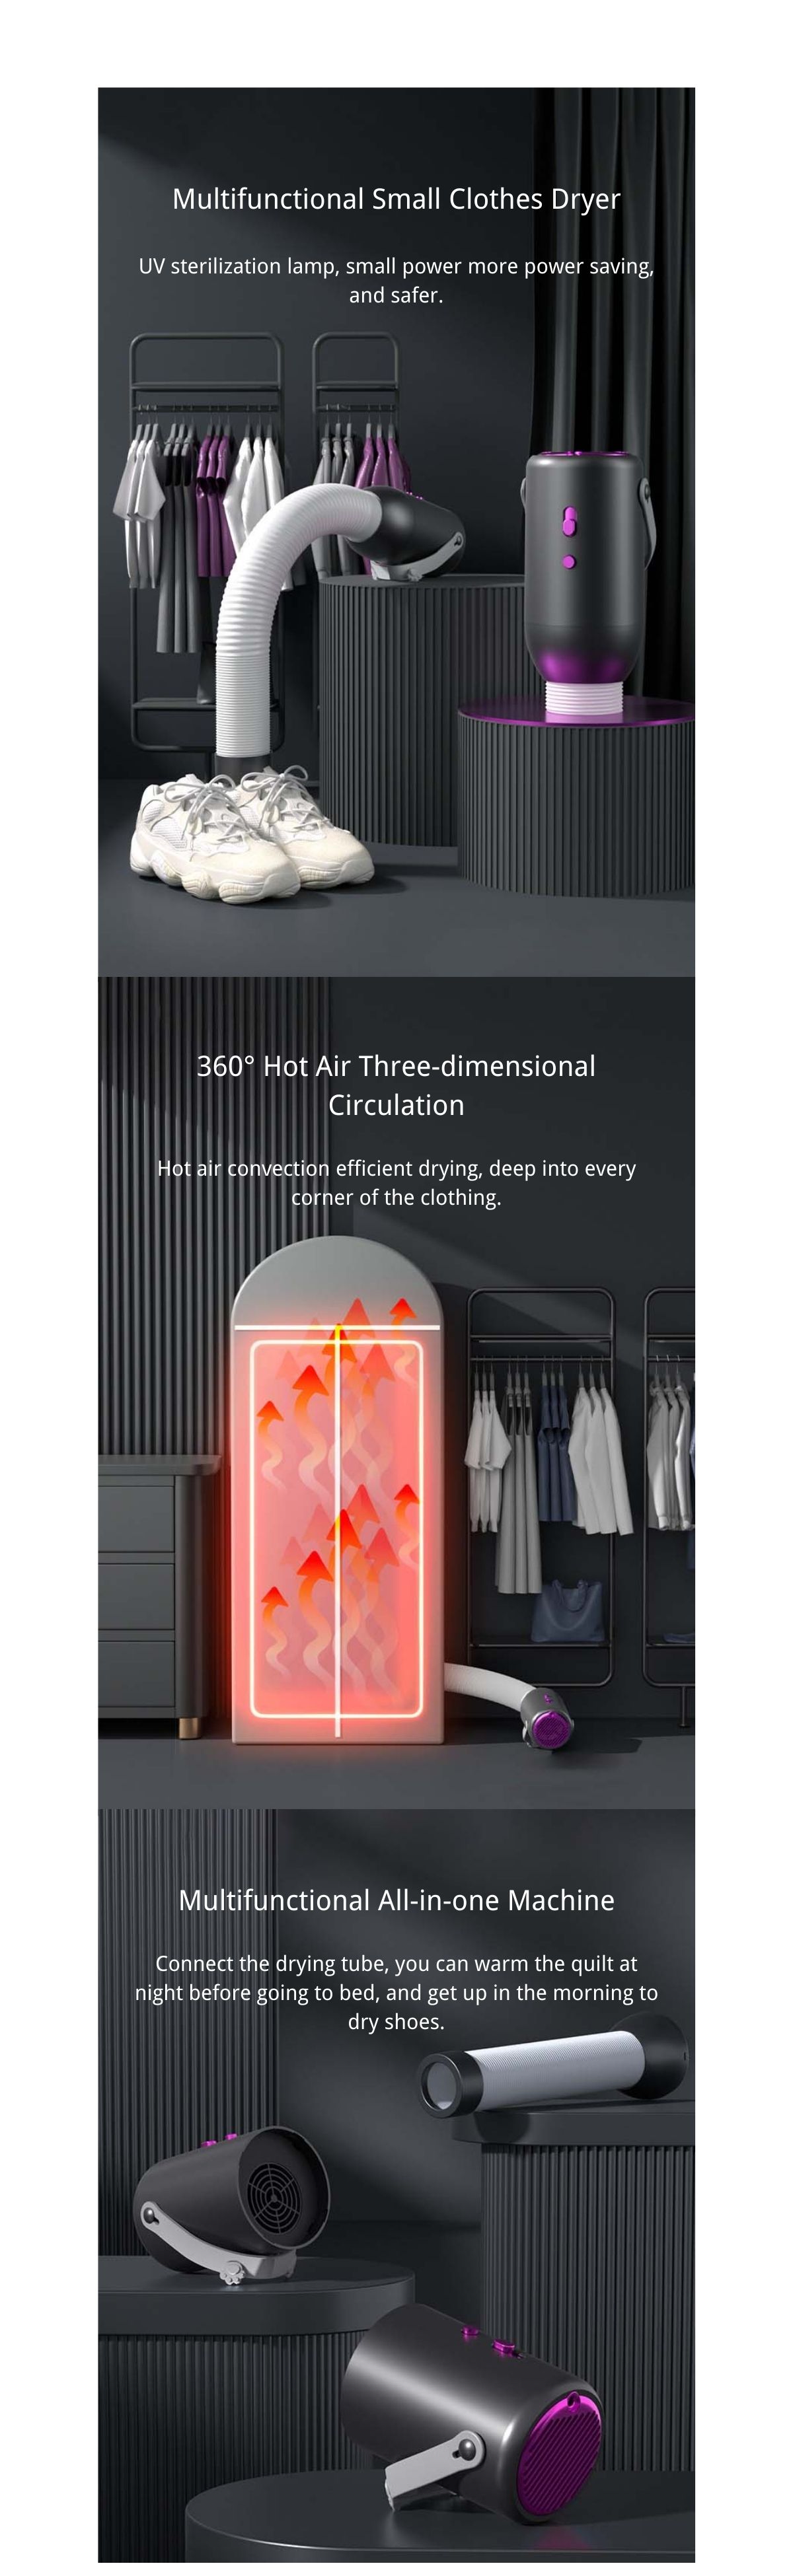 Multifunctional Small Clothes Dryer